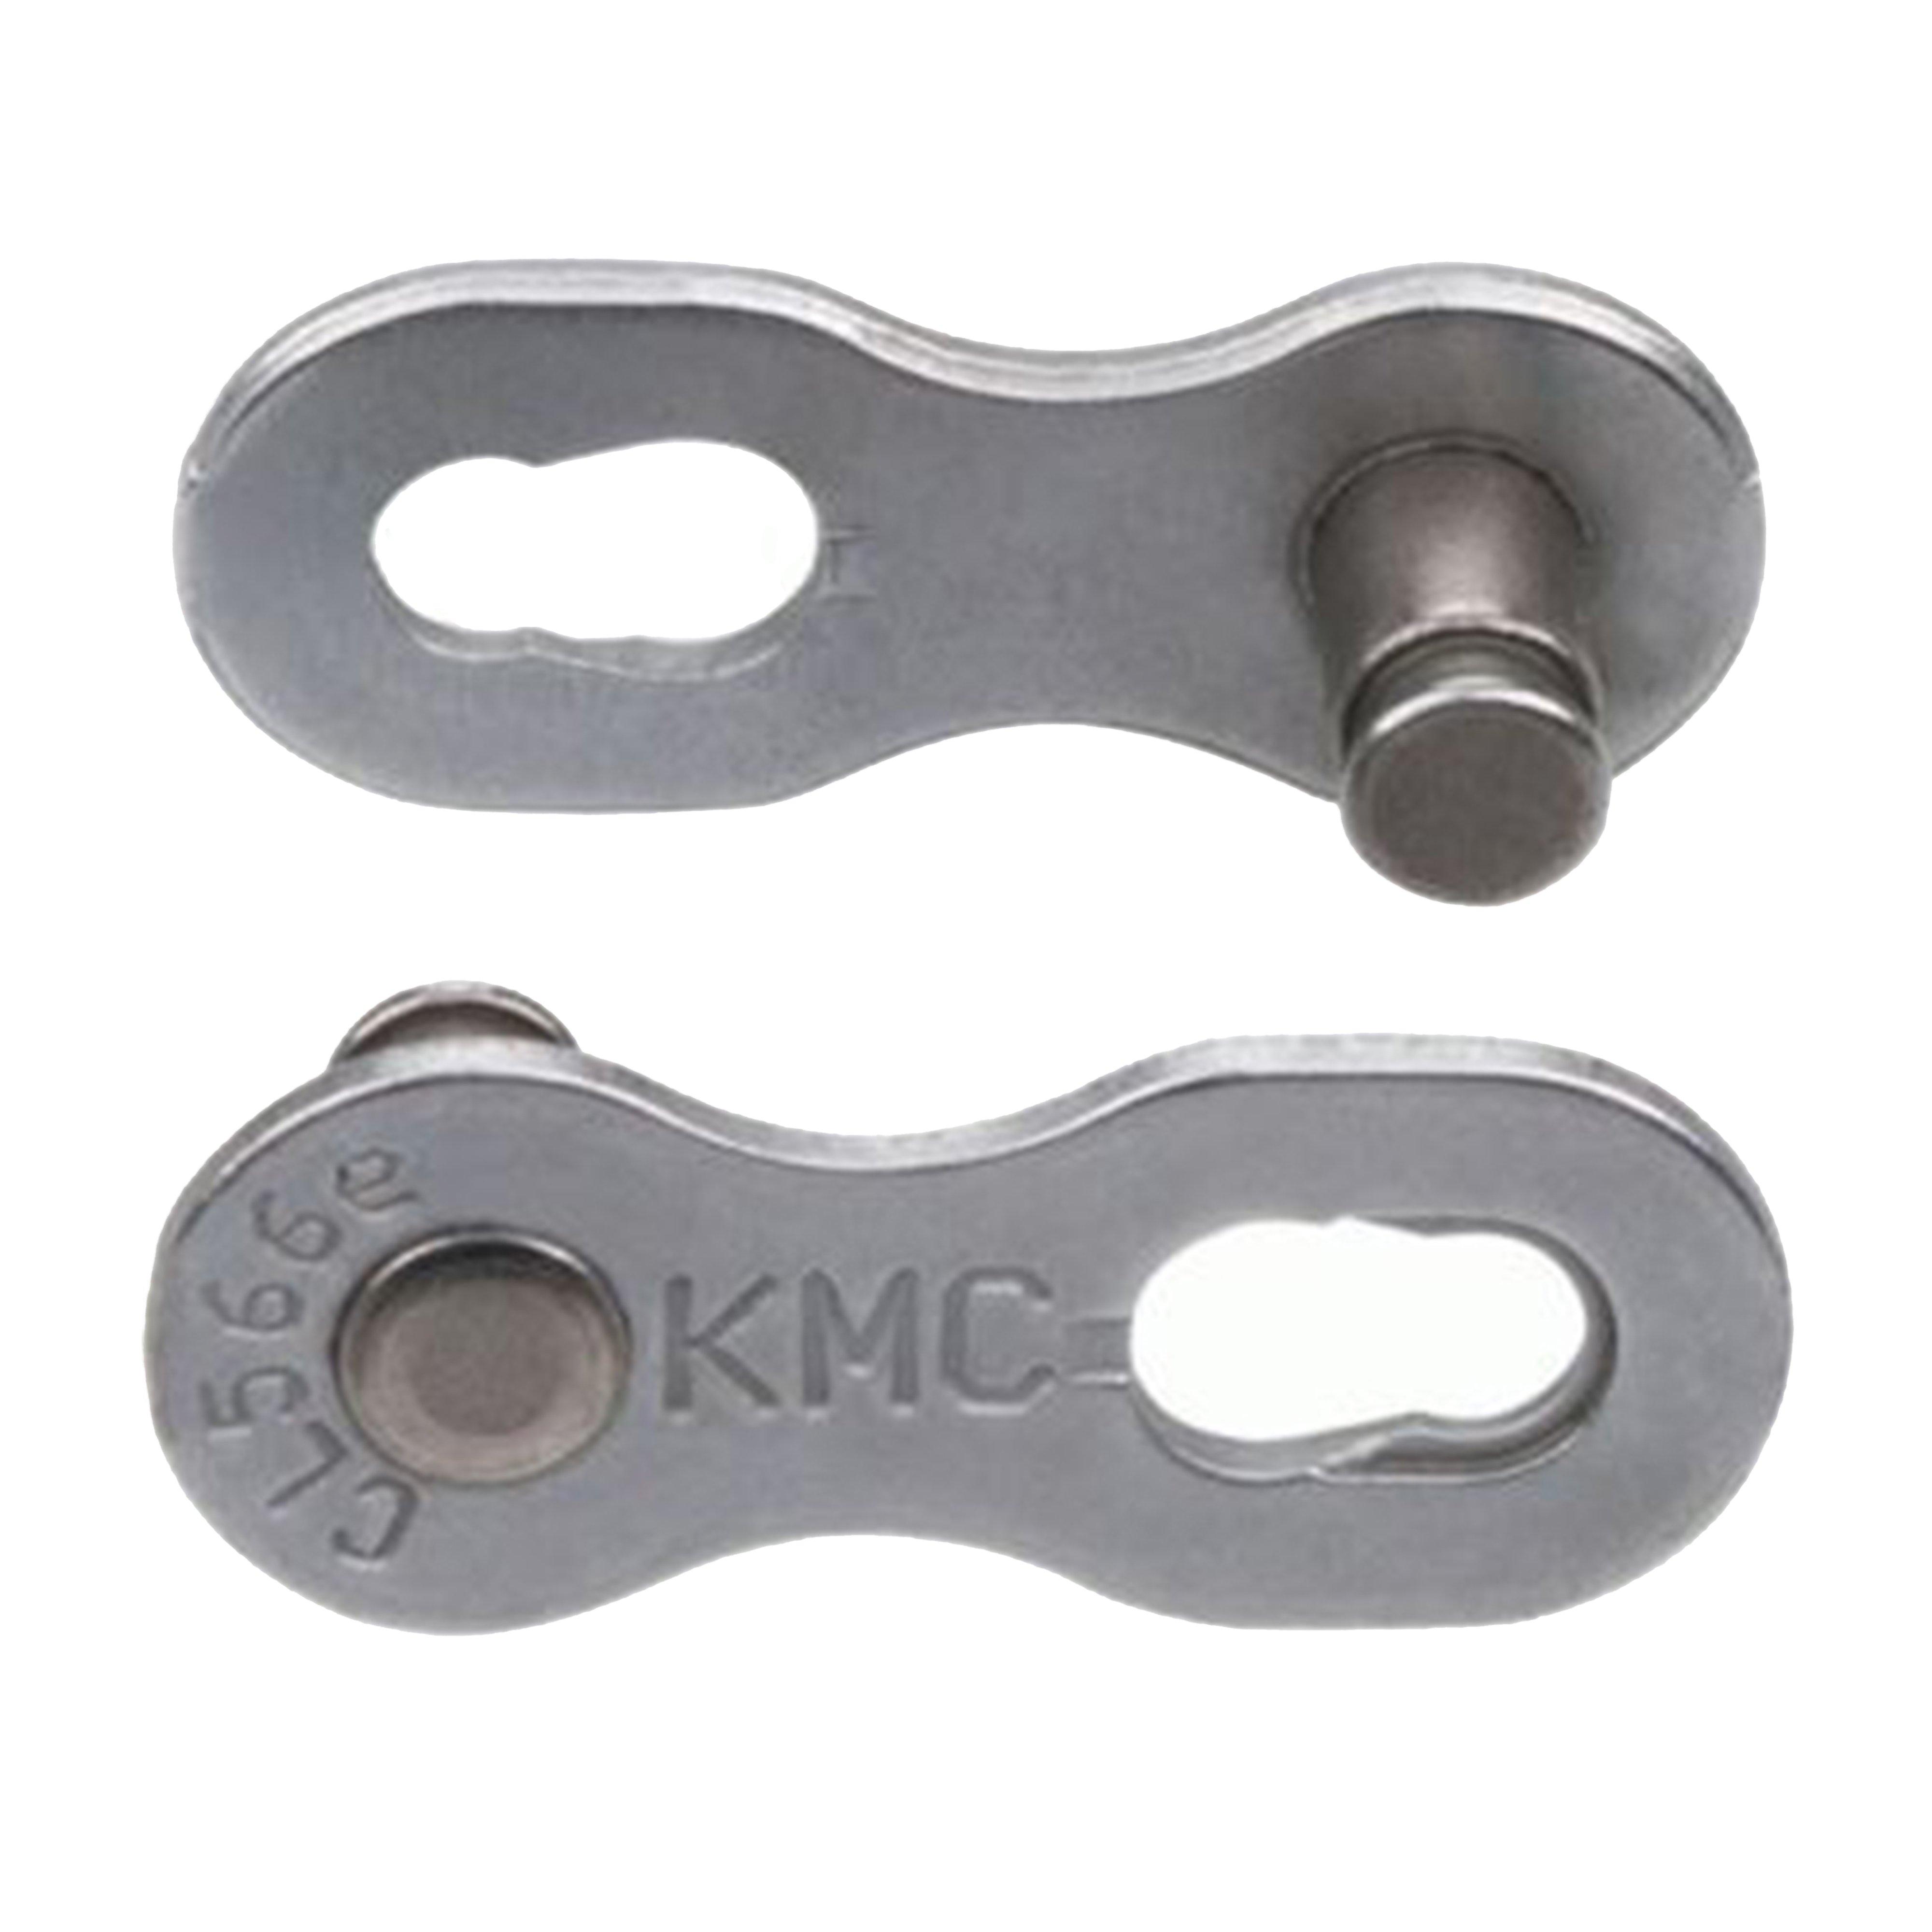 KMC Chains Missing Link 9NR EPT Silver (2 pieces) Review